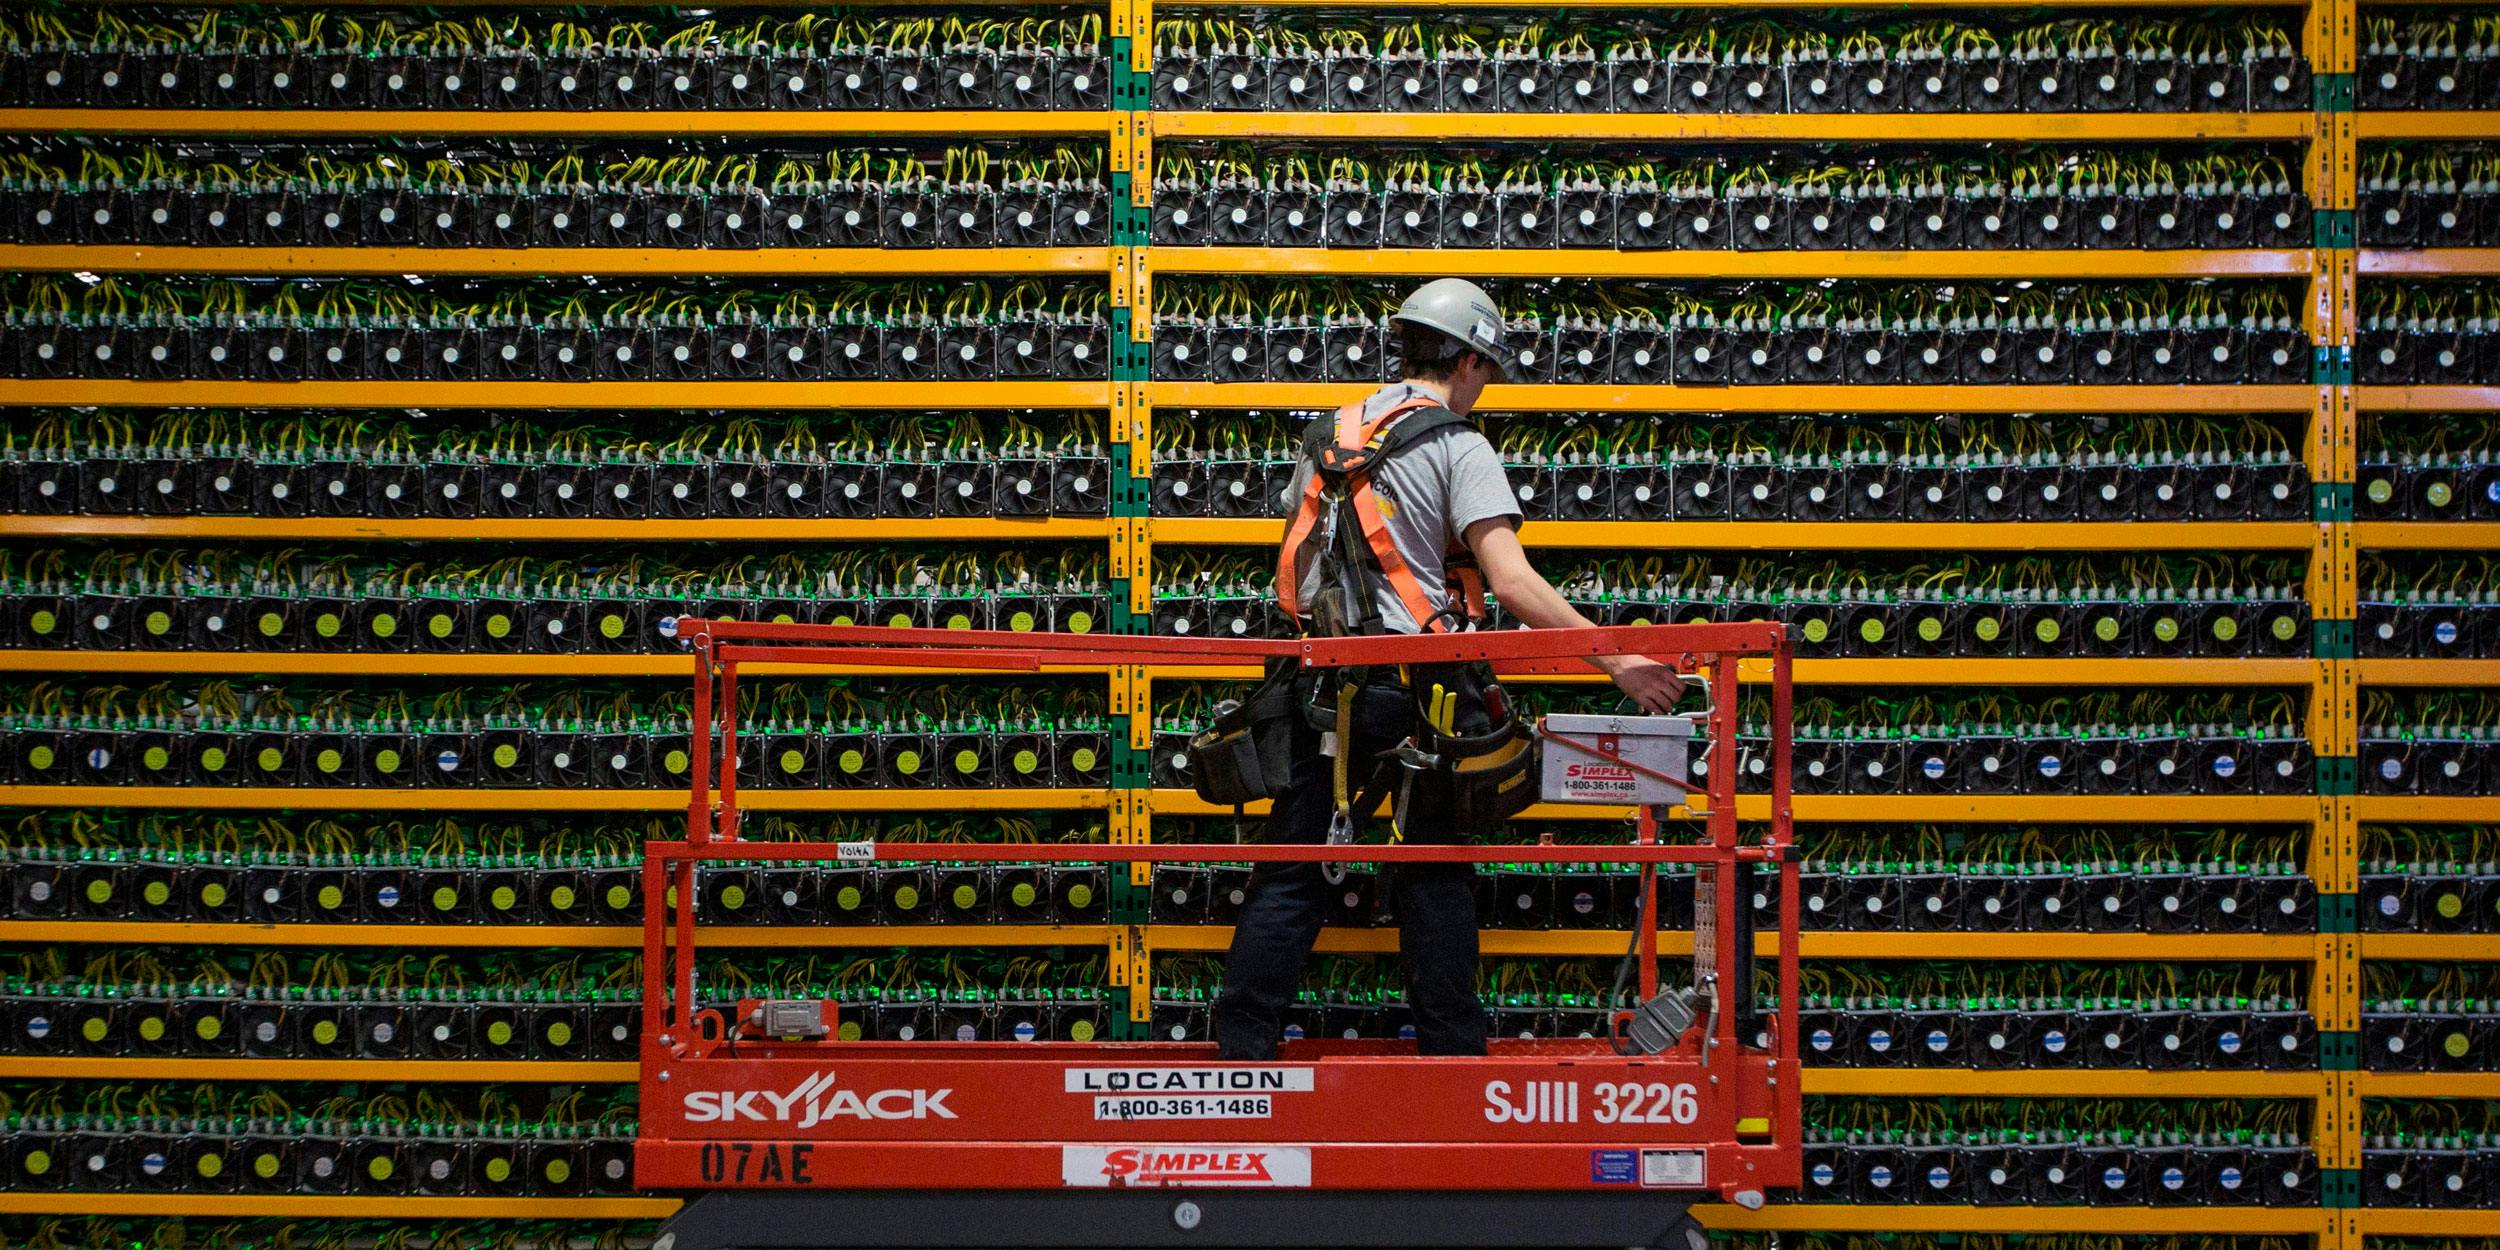 A technician inspects the backside of Bitcoin mining at Bitfarms in Saint Hyacinthe, Quebec on March 19, 2018. Bitcoin is a cryptocurrency and worldwide payment system. It is the first decentralized digital currency, as the system works based on the Blockchain technology without a central bank or single administrator. (Photo by Lars Hagberg /AFP/Getty Images)